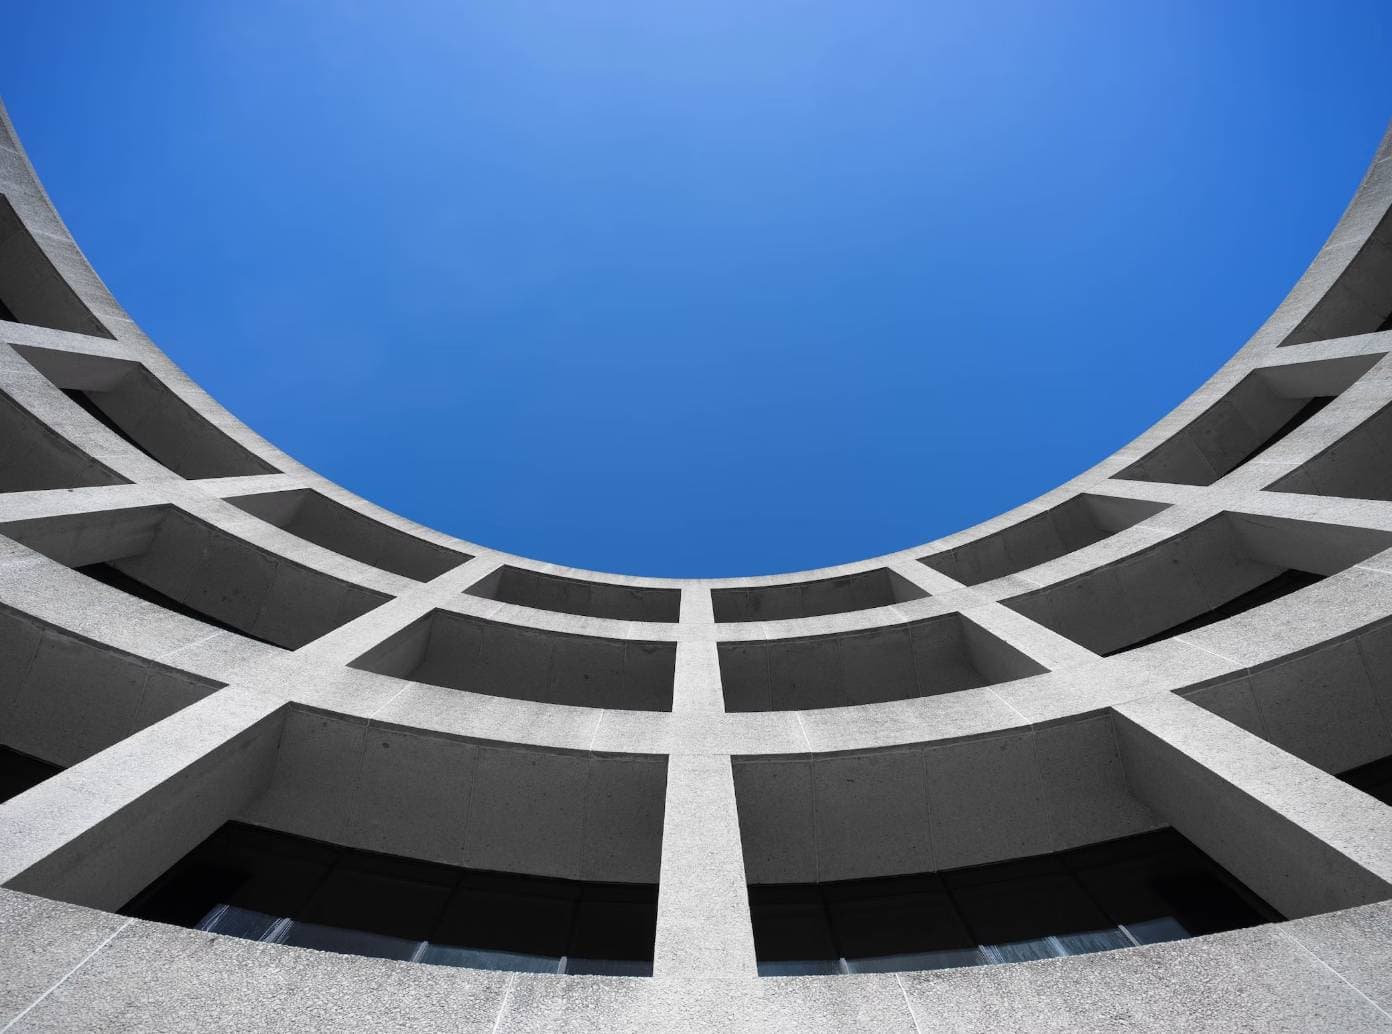 Curved building with blue sky